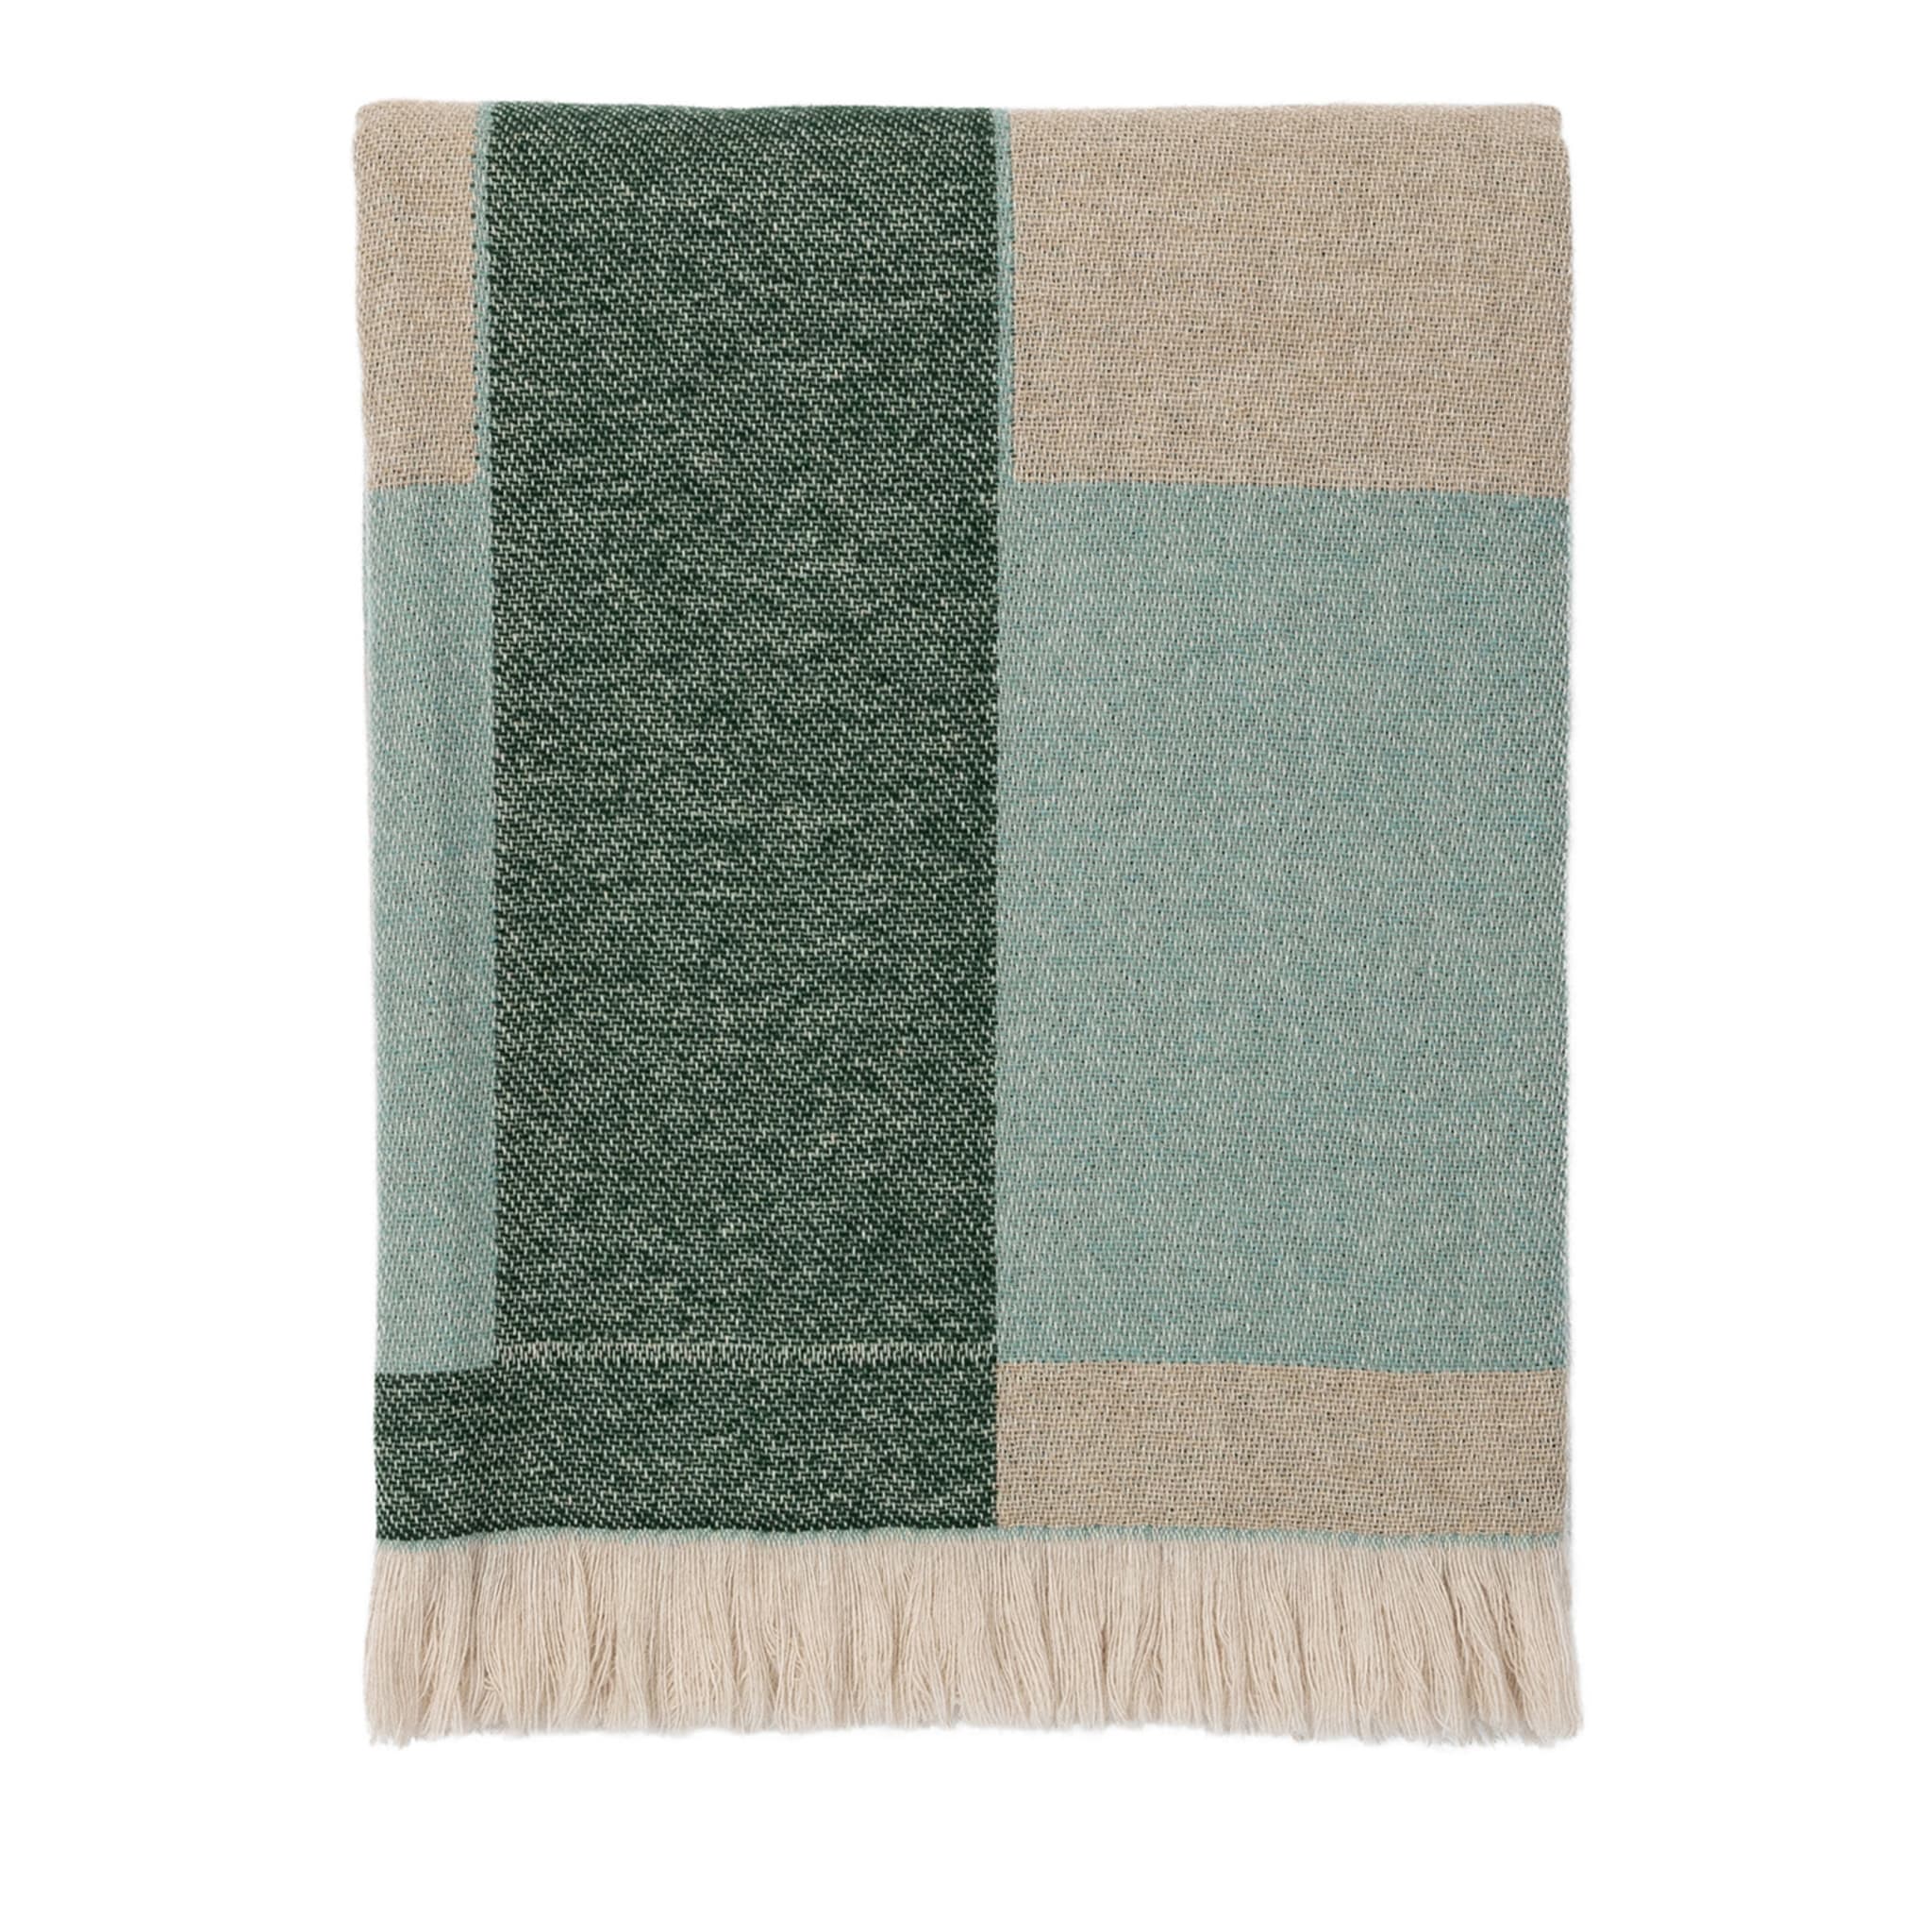 Fringed Intertwined-Patterned Green Blanket - Main view